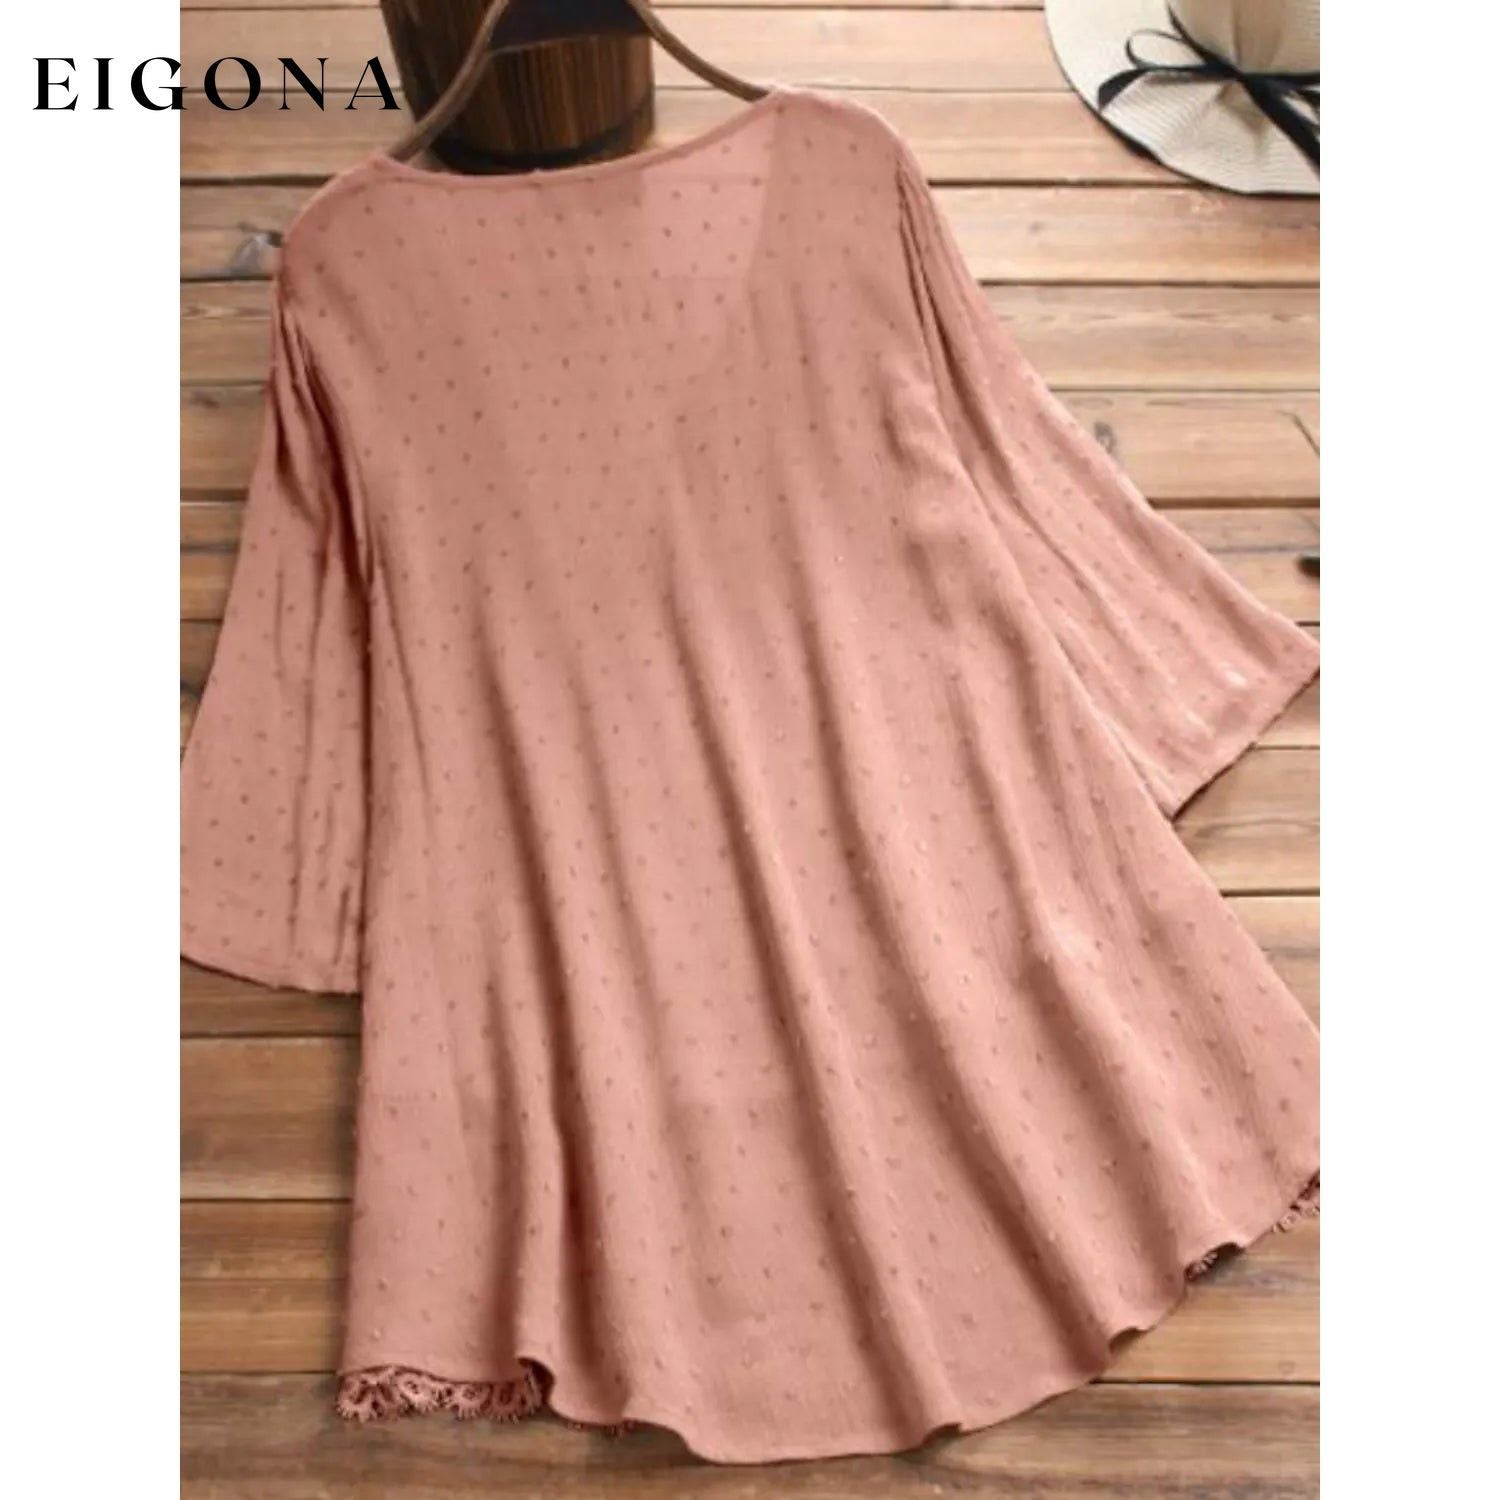 Women's V-Neck Floral Lace Top __stock:200 clothes refund_fee:1200 tops